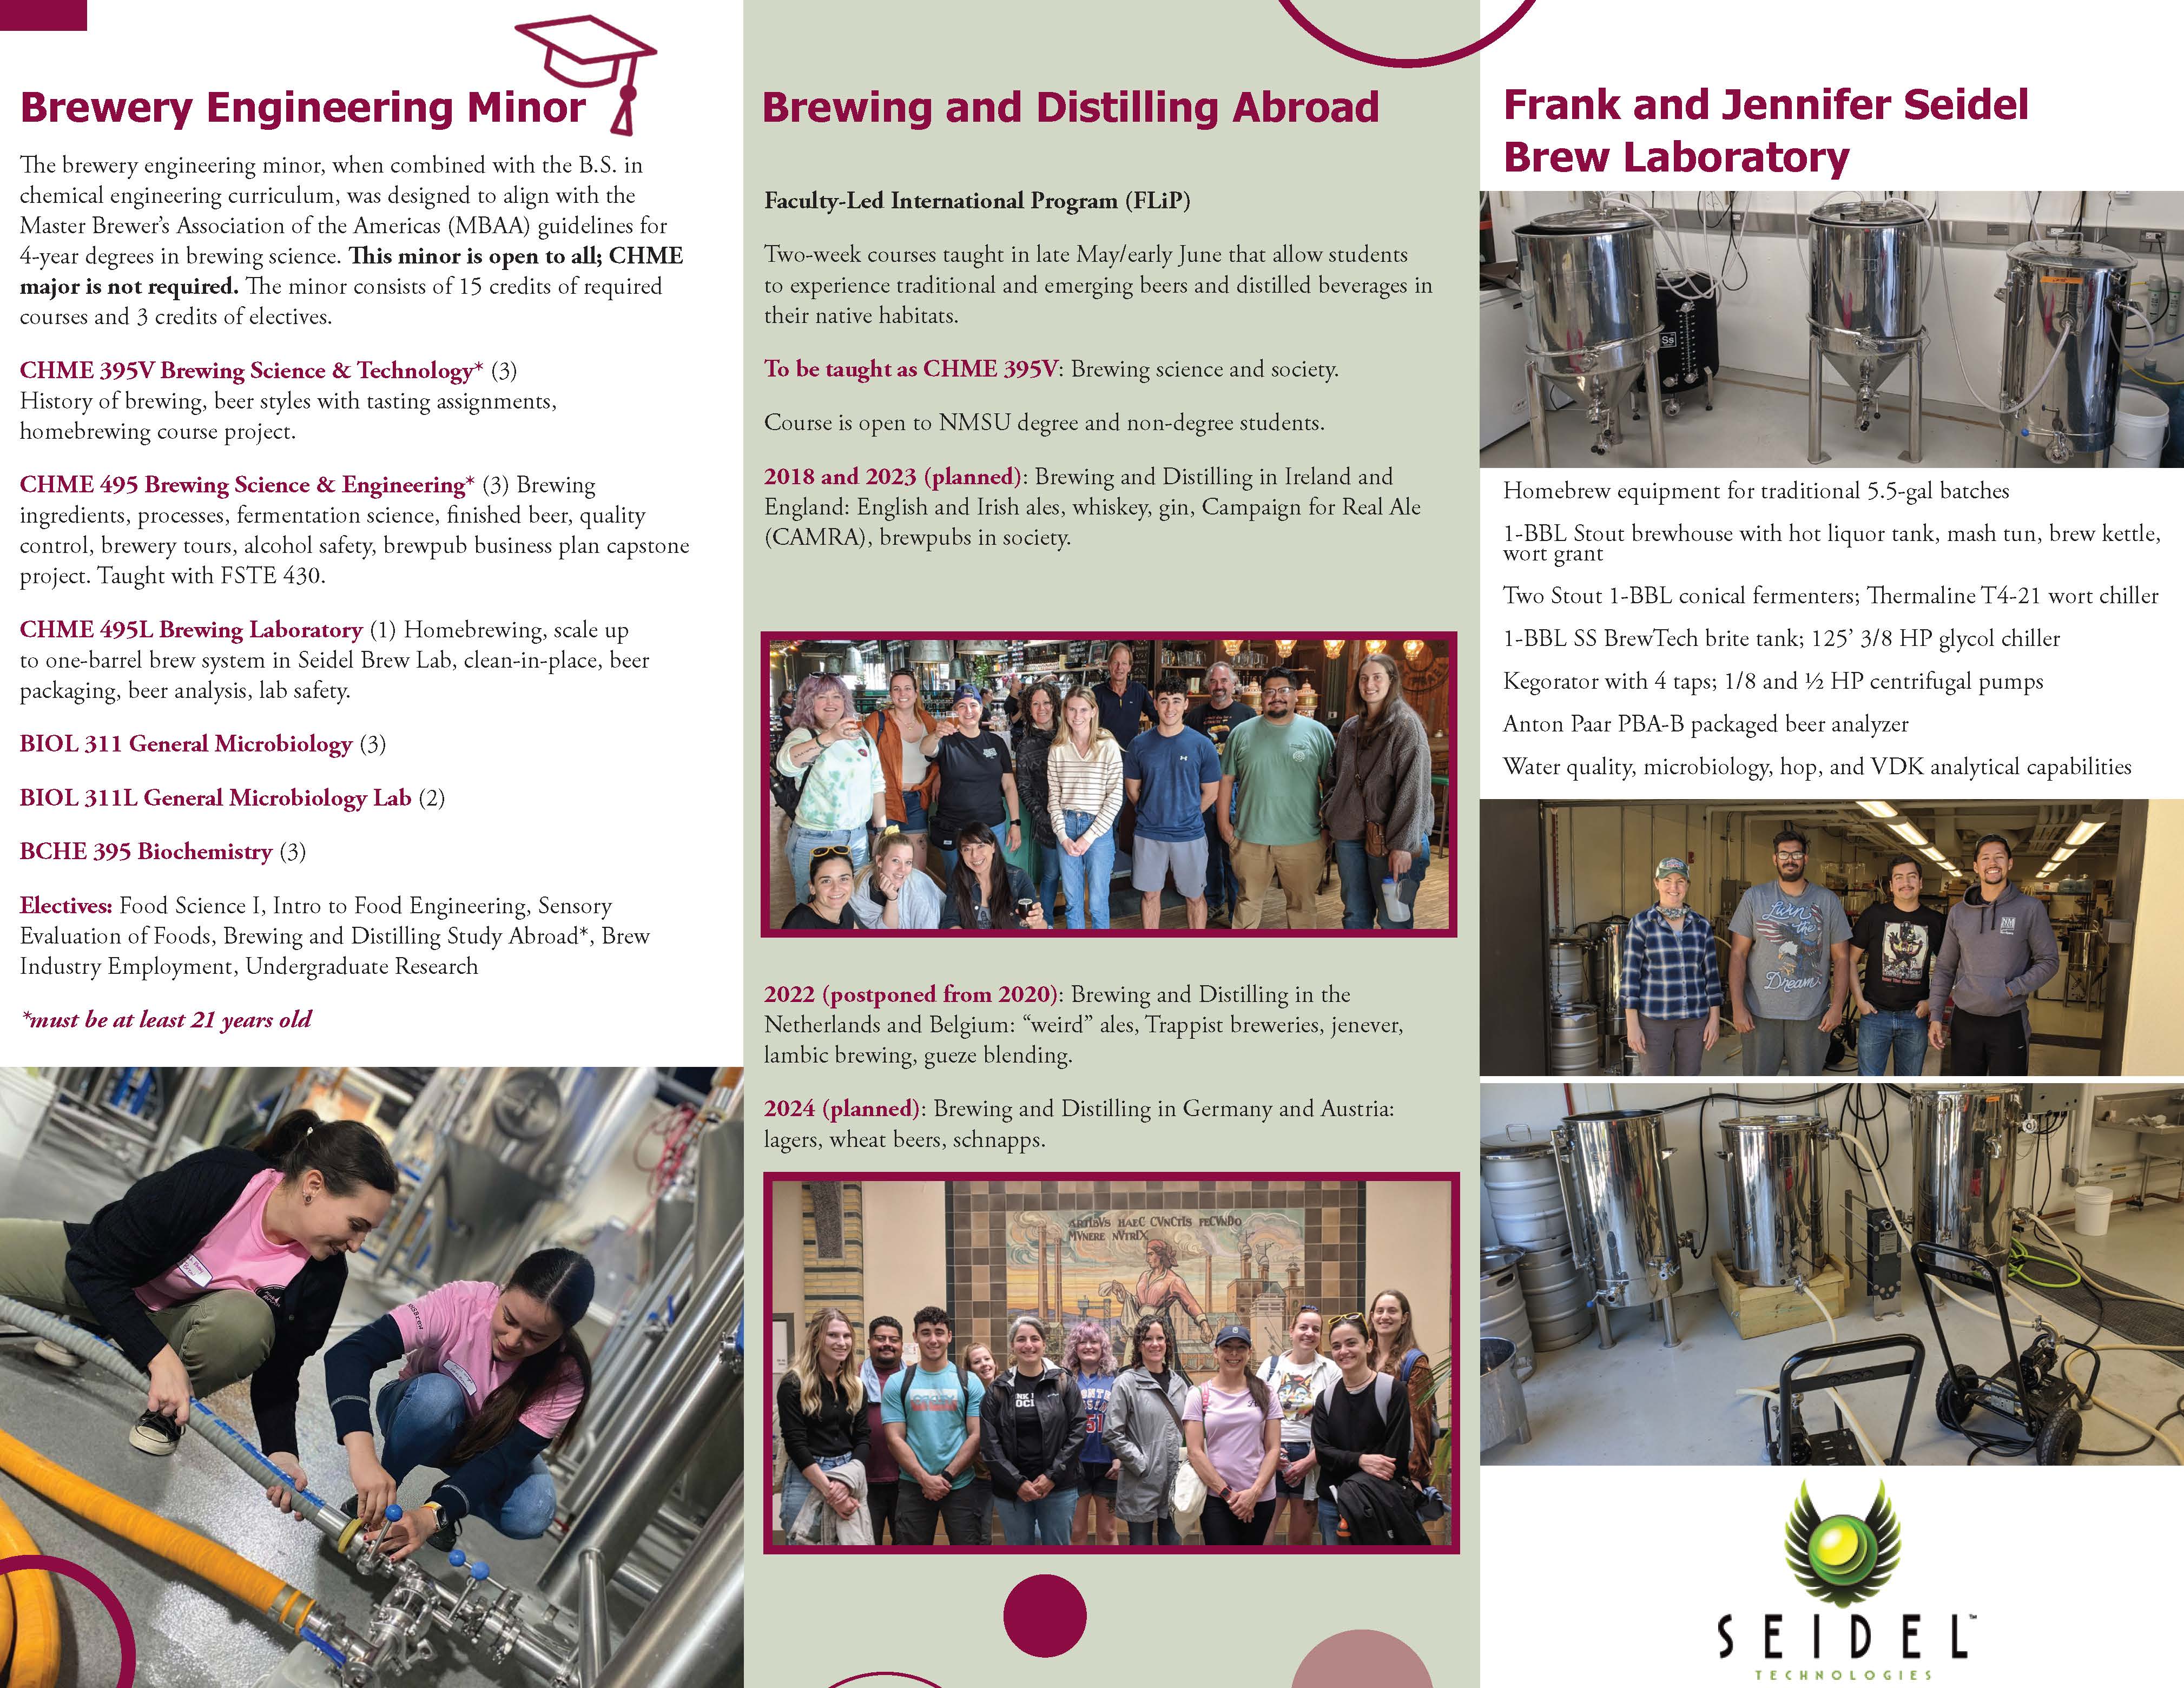 Fall-2020-Edit_-NMSBrew_Brochure-IMAGES_Page_2.jpg